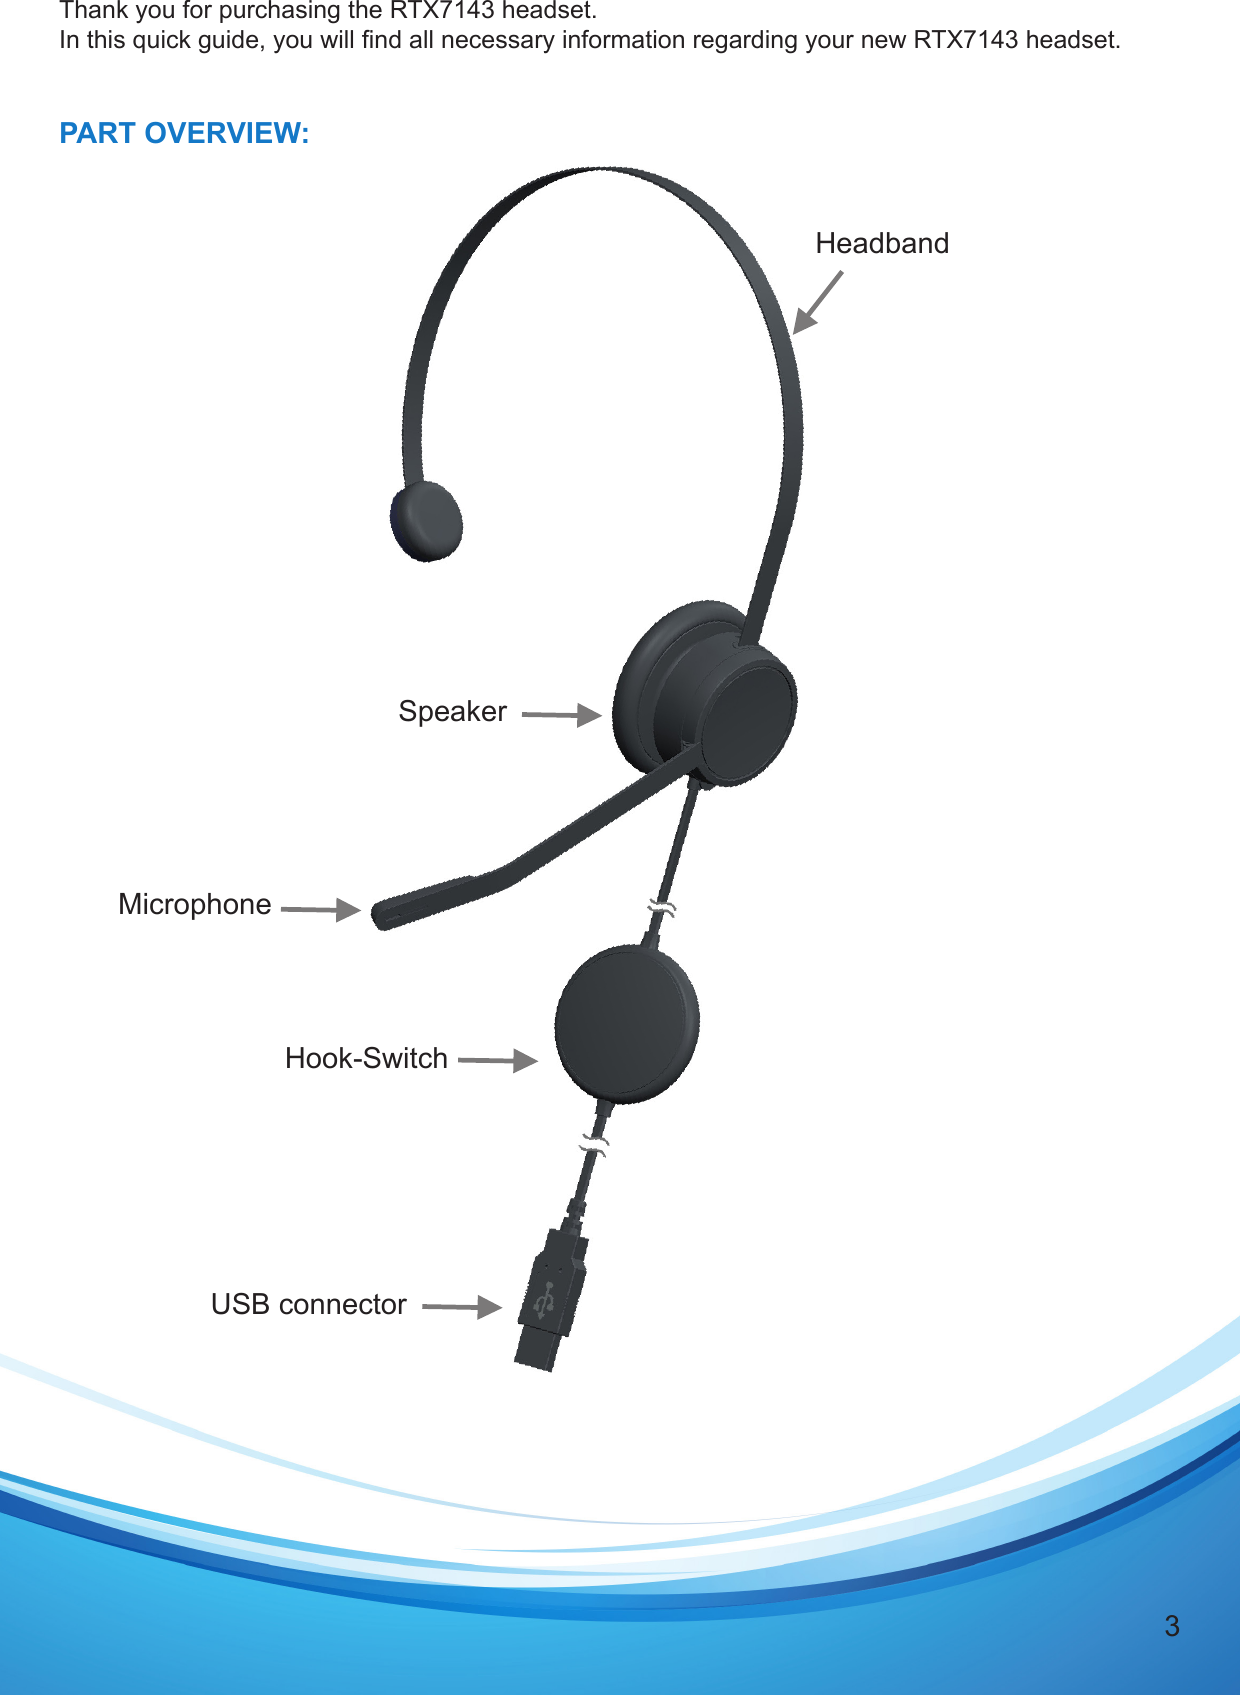 3Thank you for purchasing the RTX7143 headset. In this quick guide, you will nd all necessary information regarding your new RTX7143 headset.  PART OVERVIEW:HeadbandMicrophoneUSB connectorHook-SwitchSpeaker